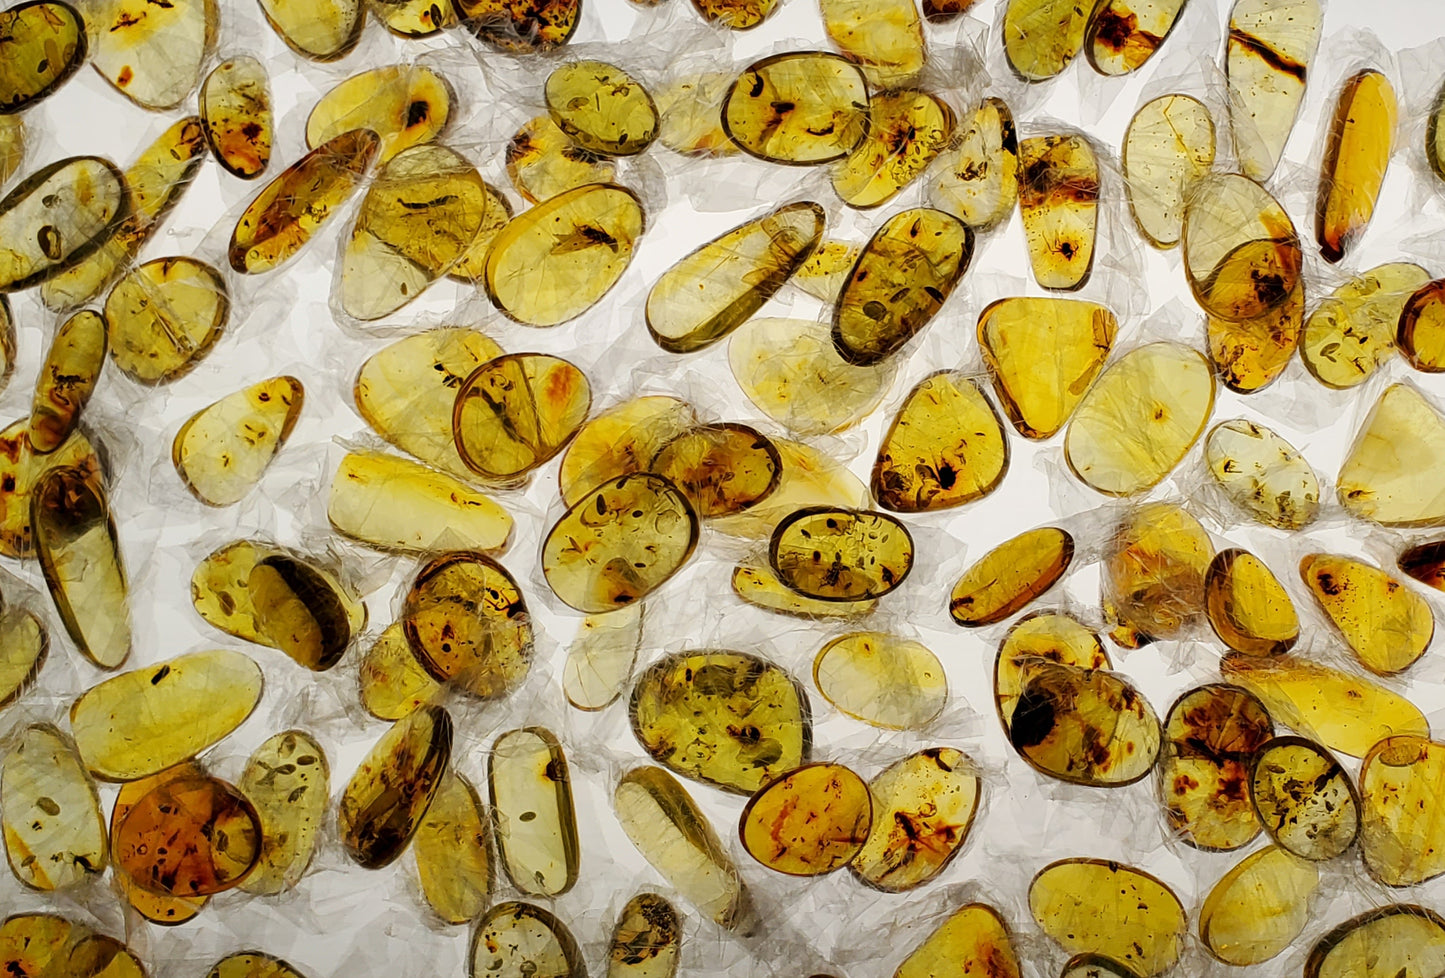 10 Small Amber Specimens with Insect Inclusions